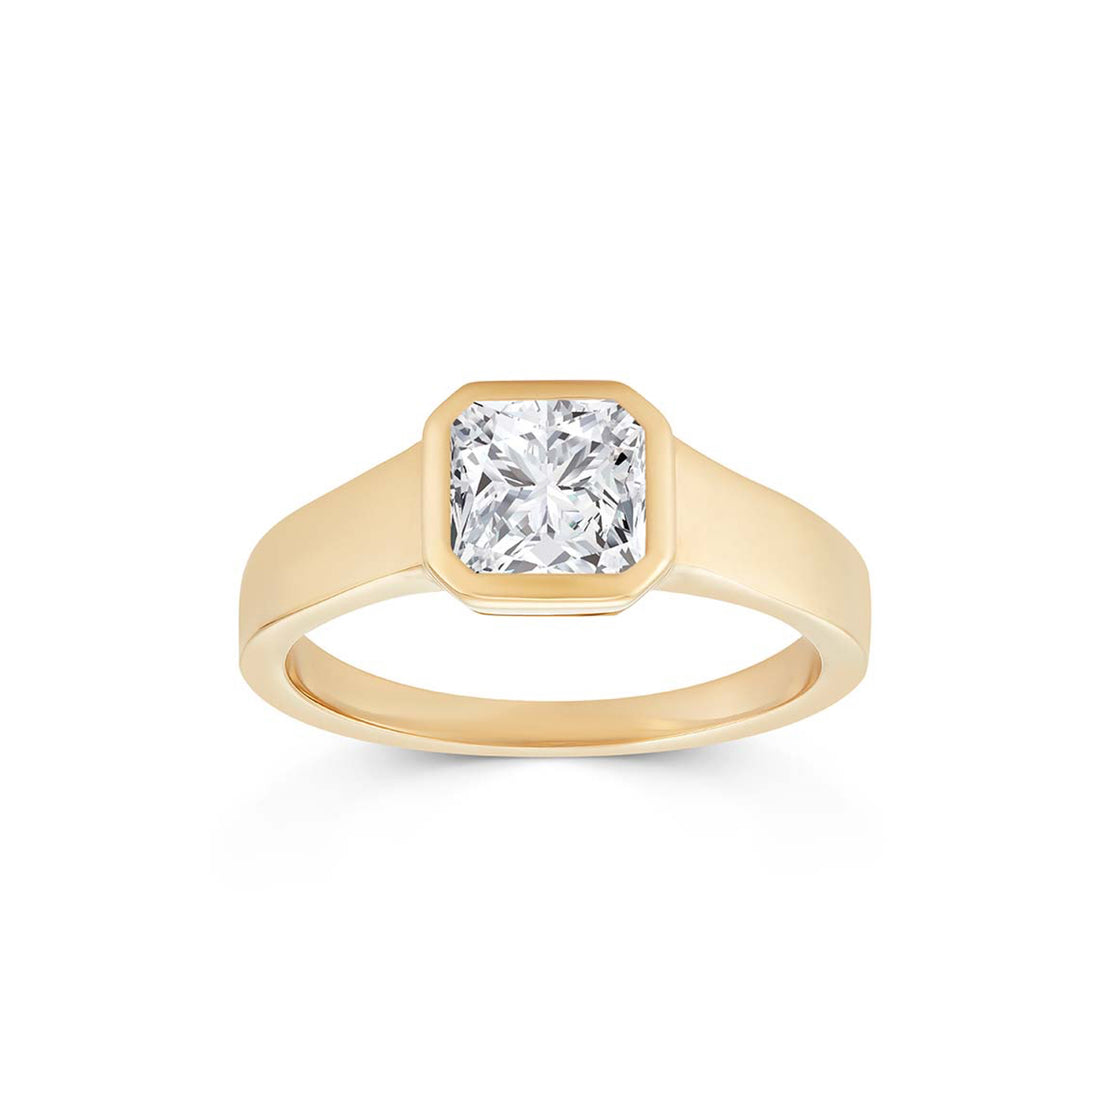  Radiant Cut Diamond One & Only Ring by Roxanne Rajcoomar-Hadden | The Cut London